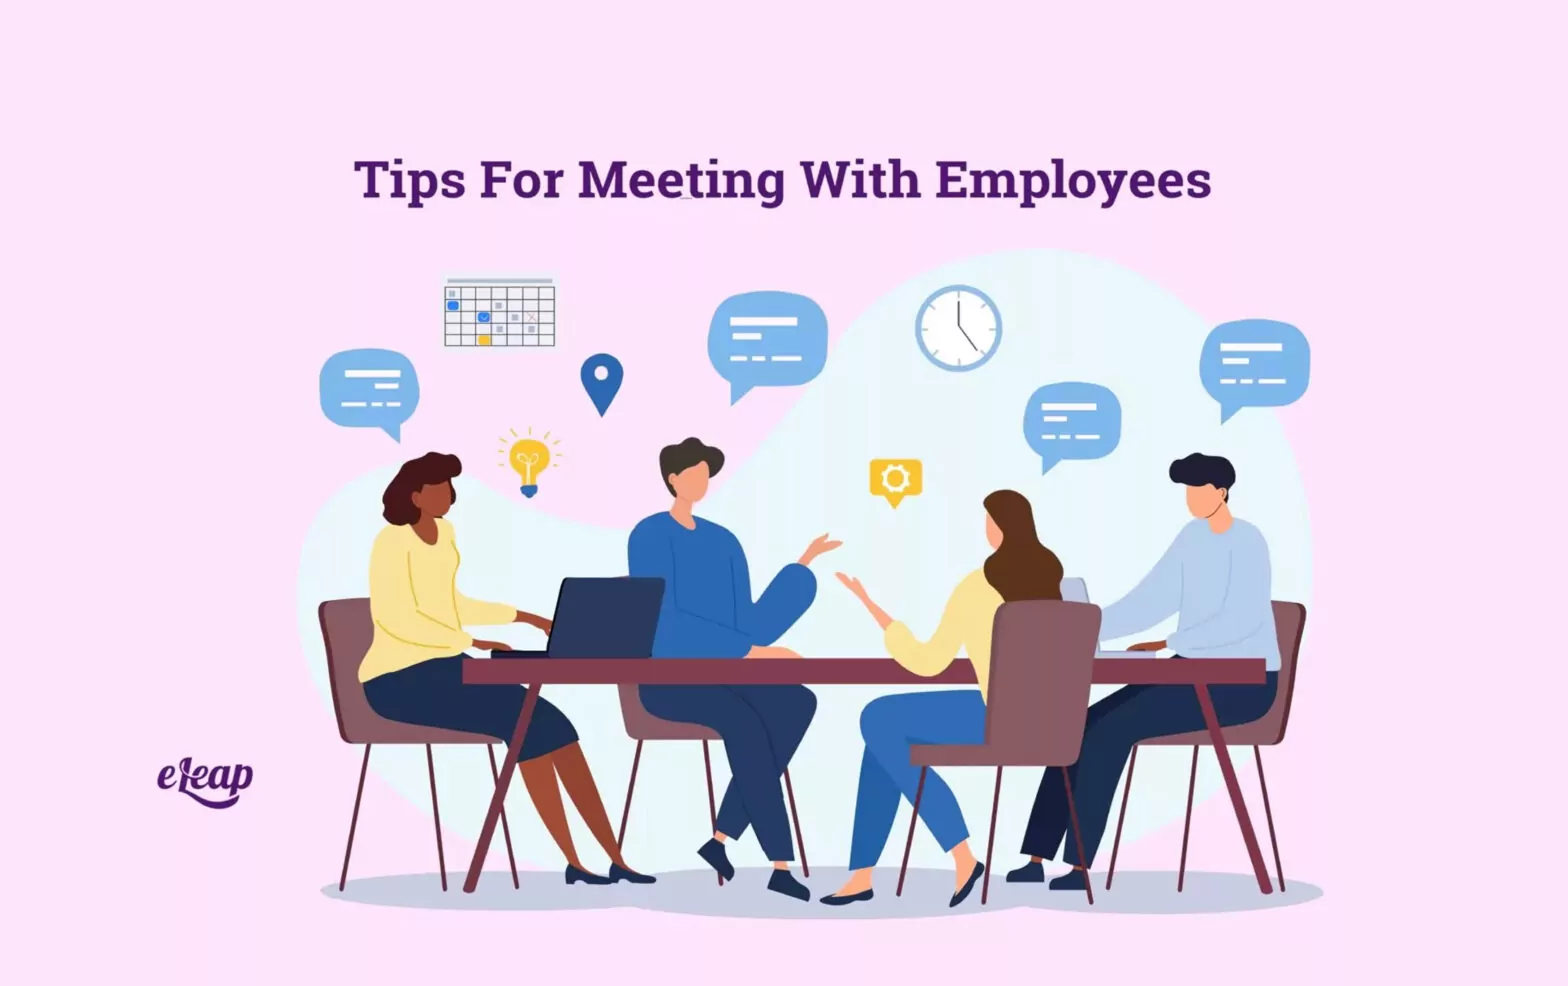 Tips for Meeting with Employees